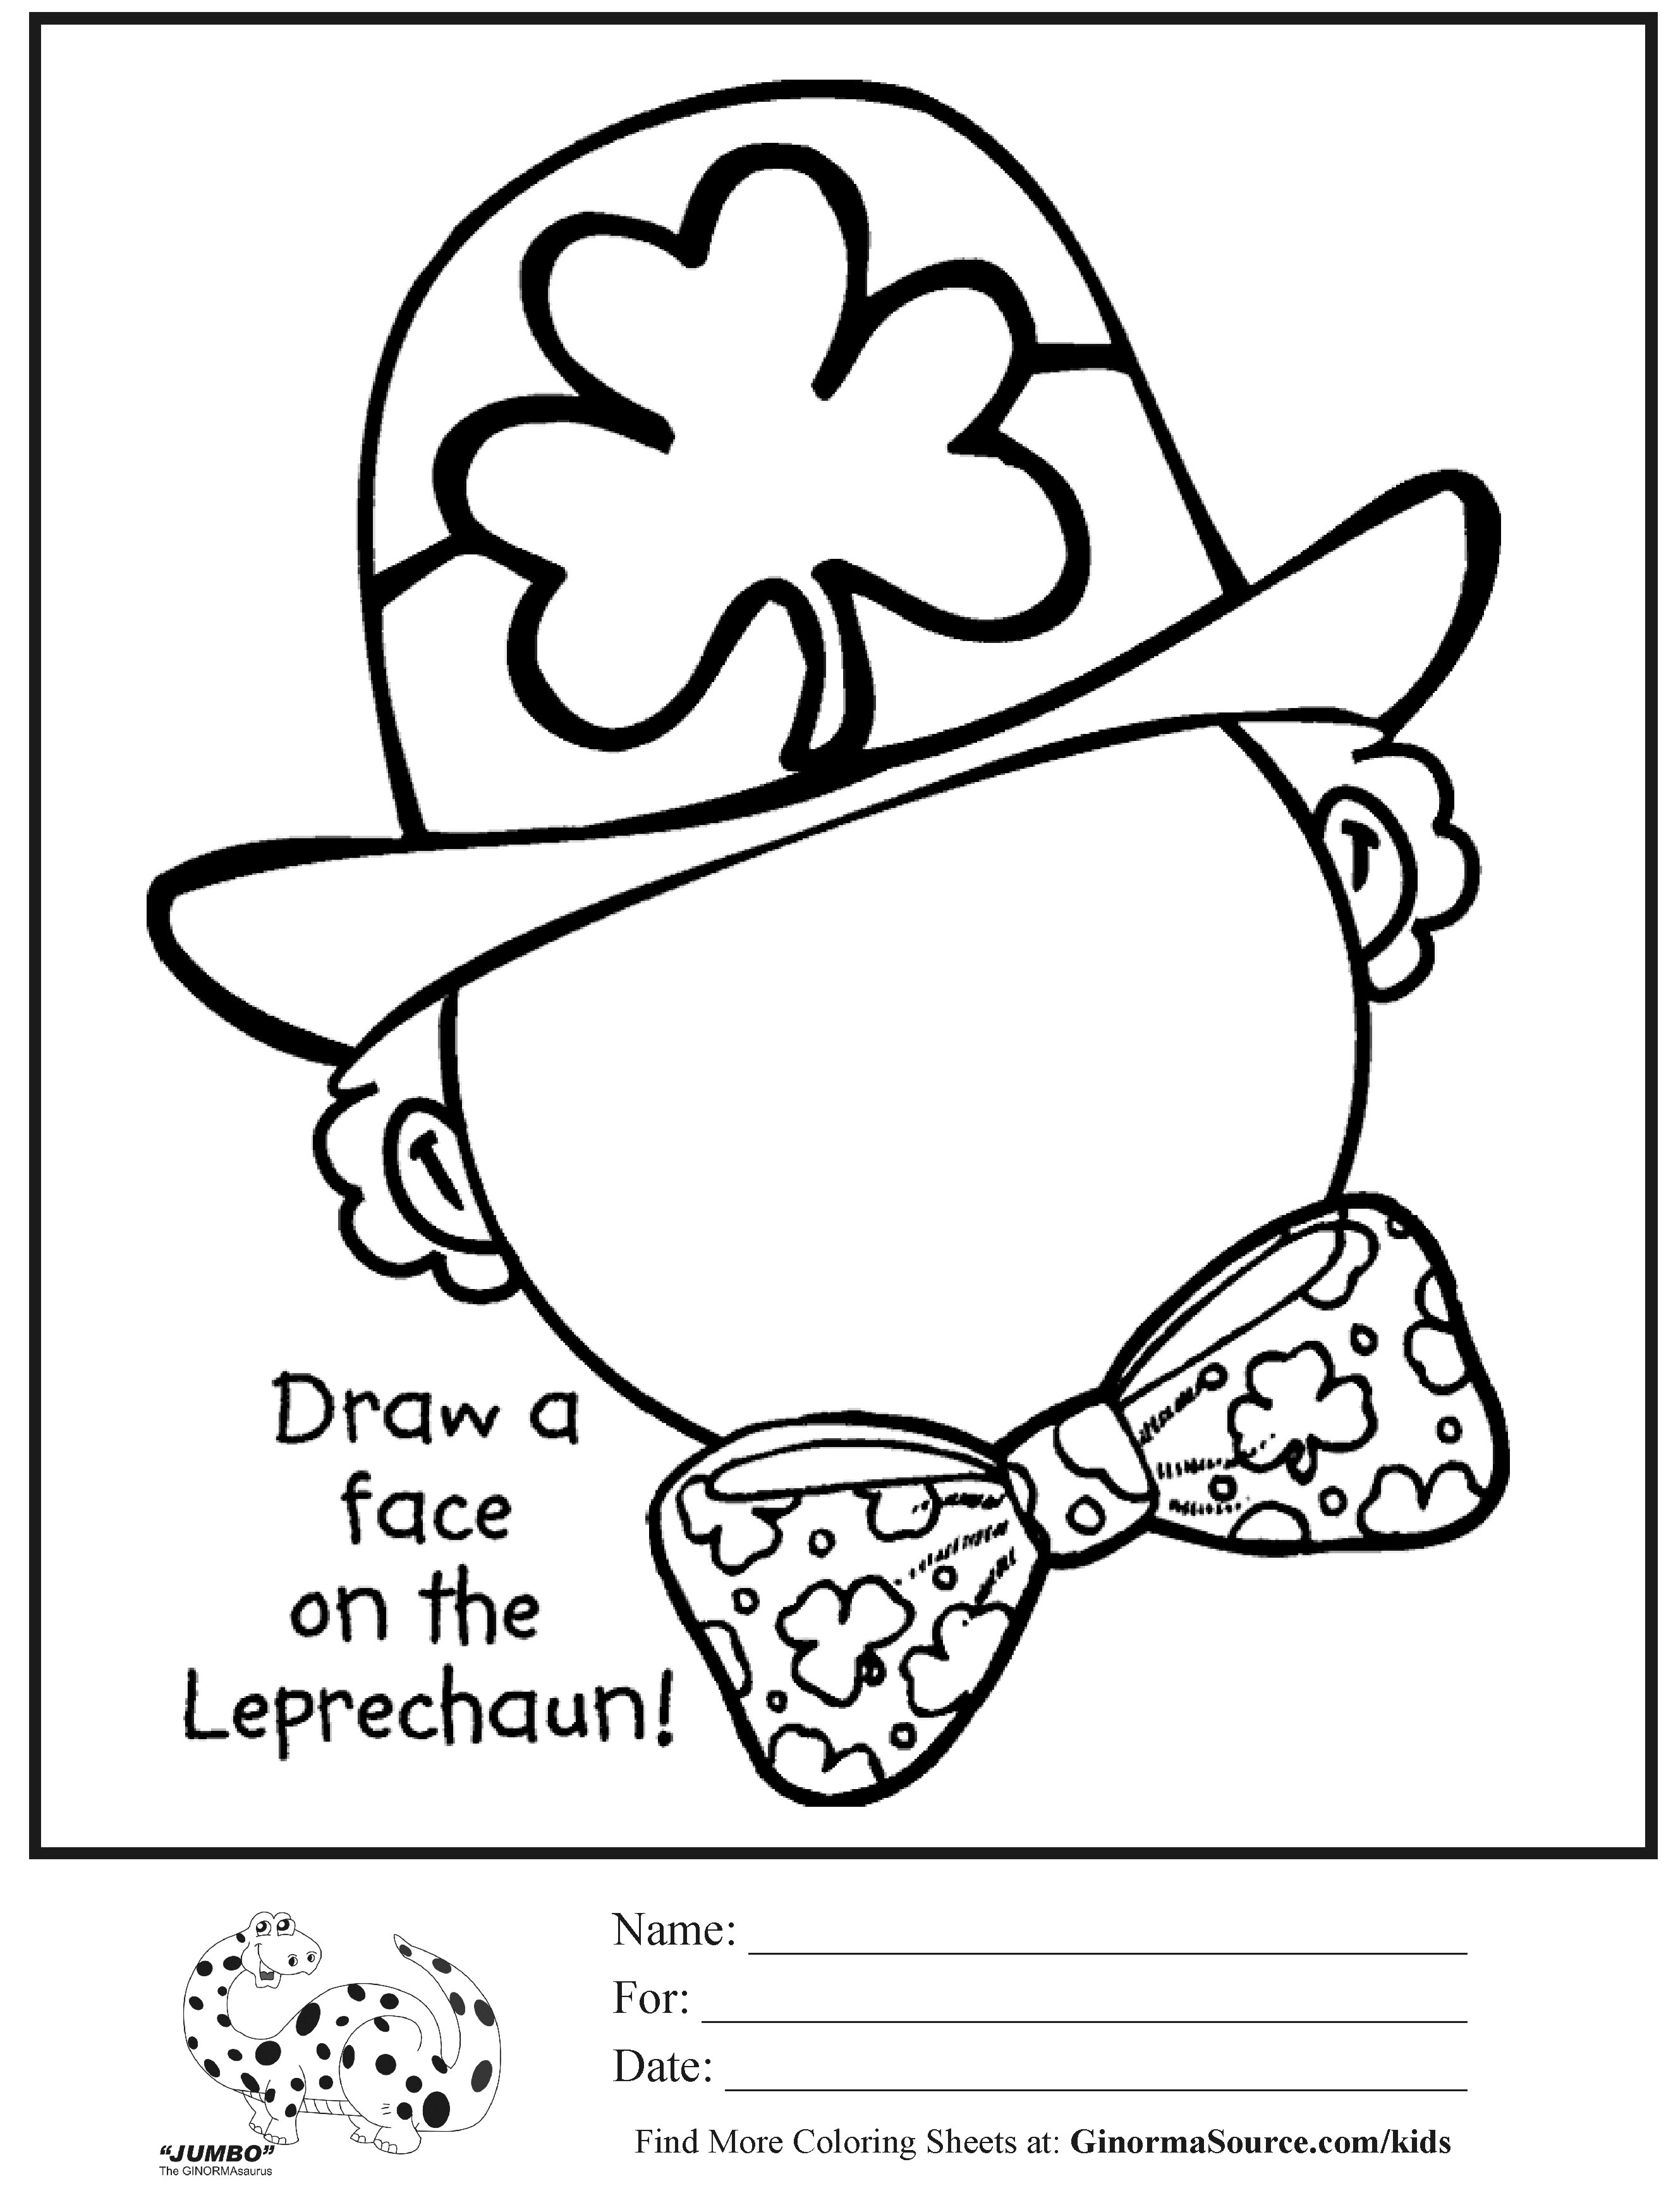 Free St Patricks Day Drawings, Download Free Clip Art, Free Clip Art - Free Printable St Patrick Day Coloring Pages